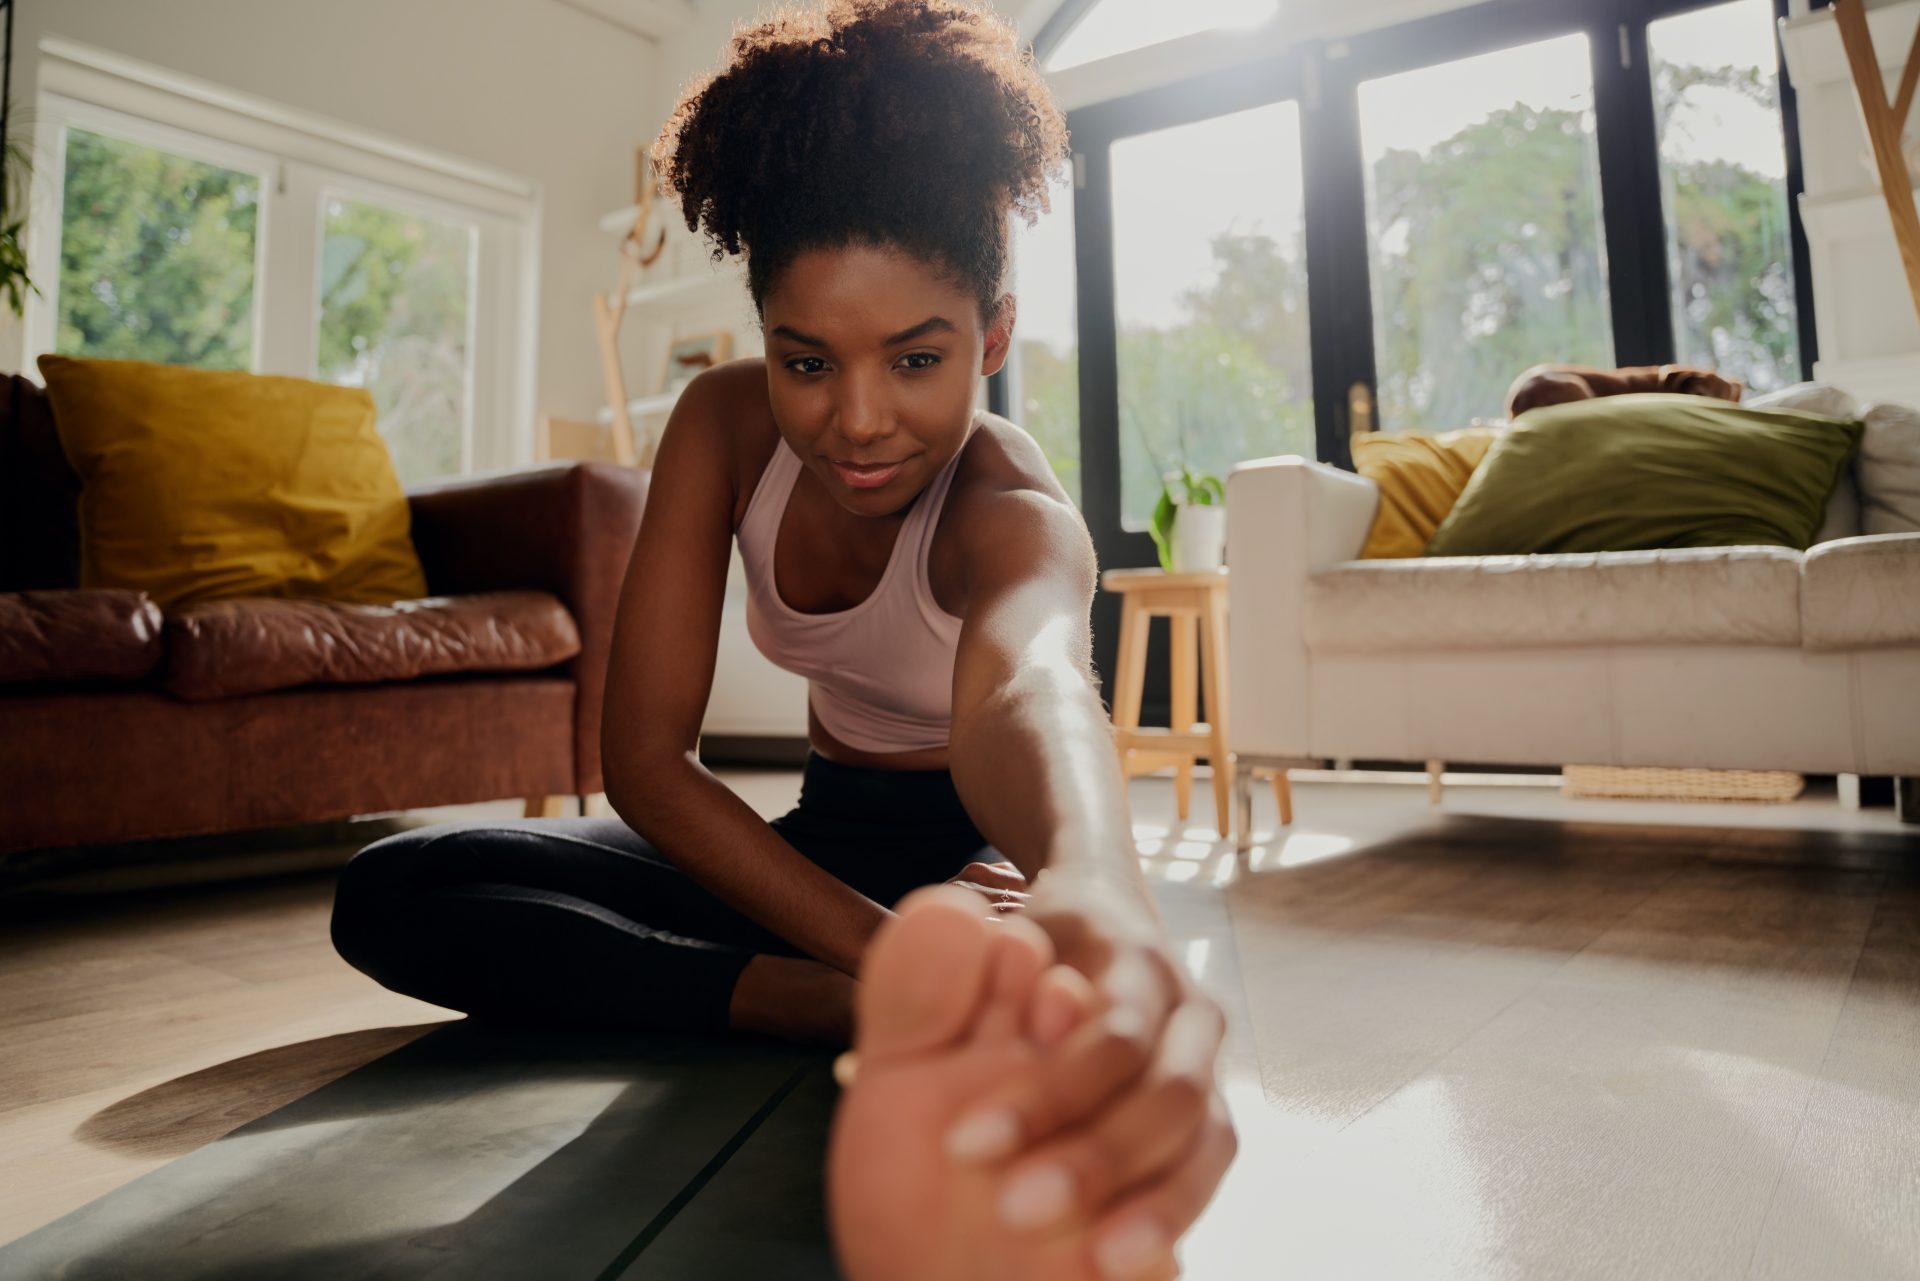 Bunion therapy: how toe yoga can reduce bunion pain